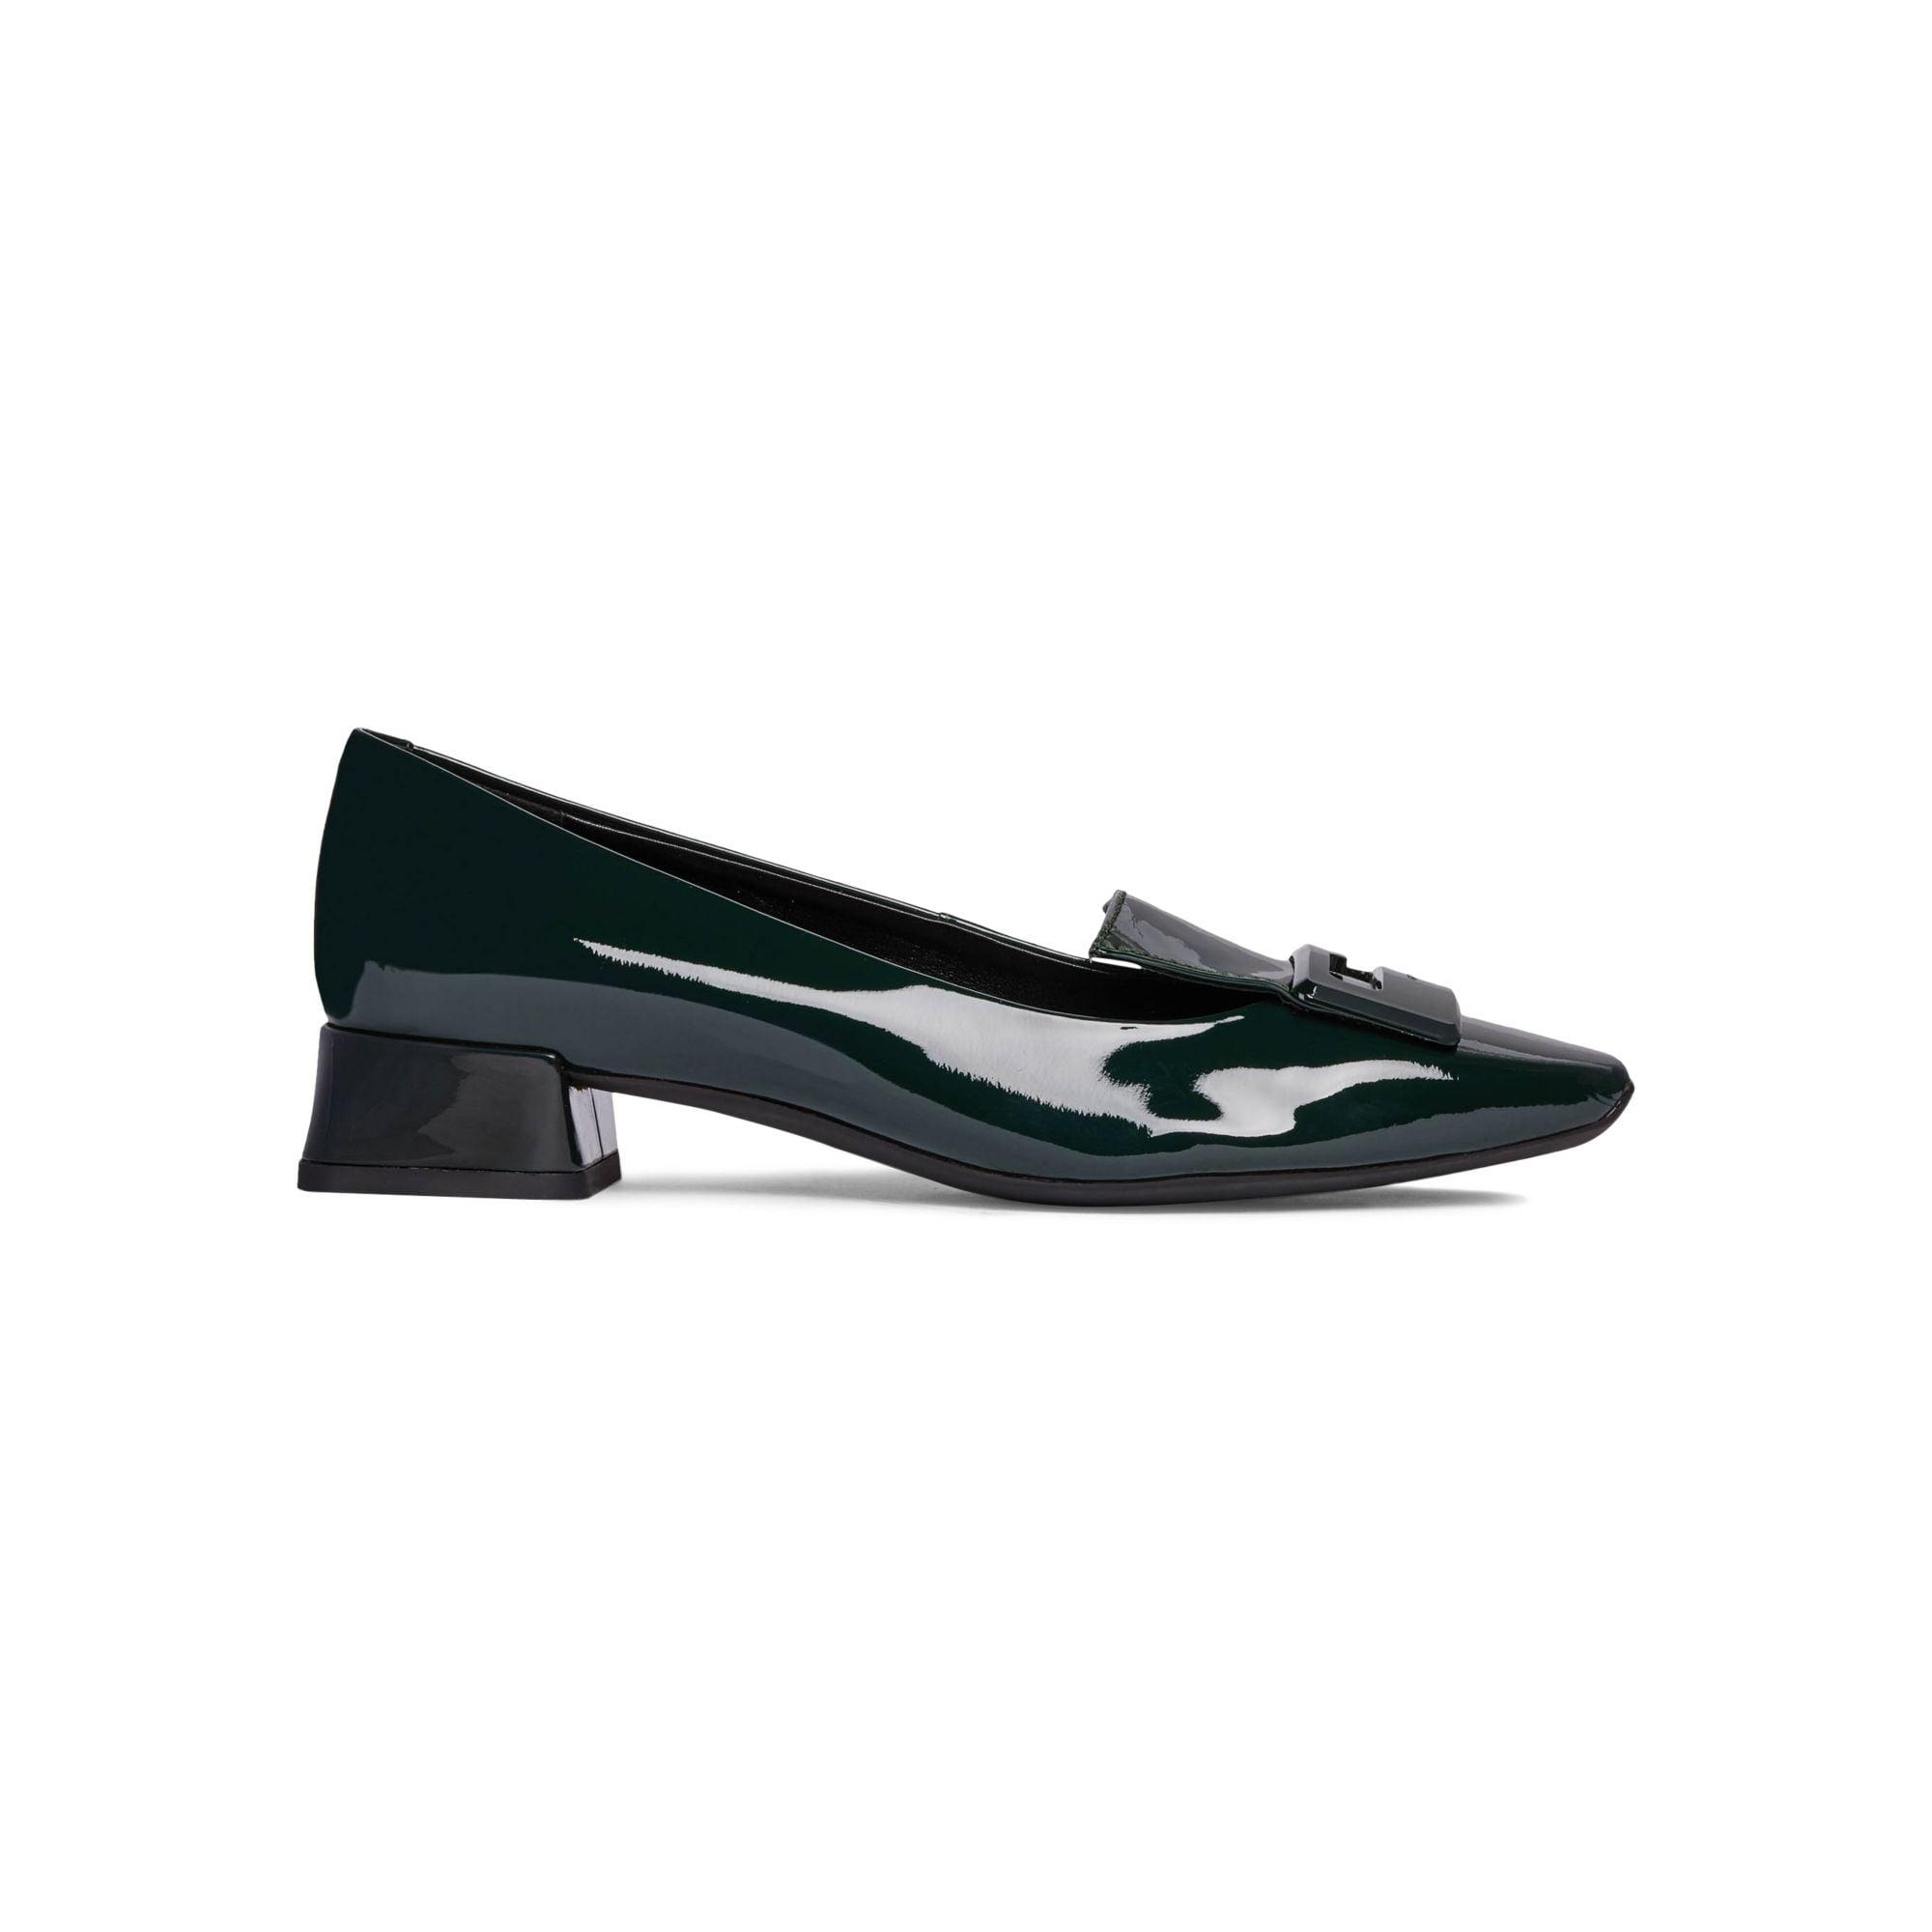 Geox Vivyanne Patent Leather Heeled Loafers in Blue - Lyst